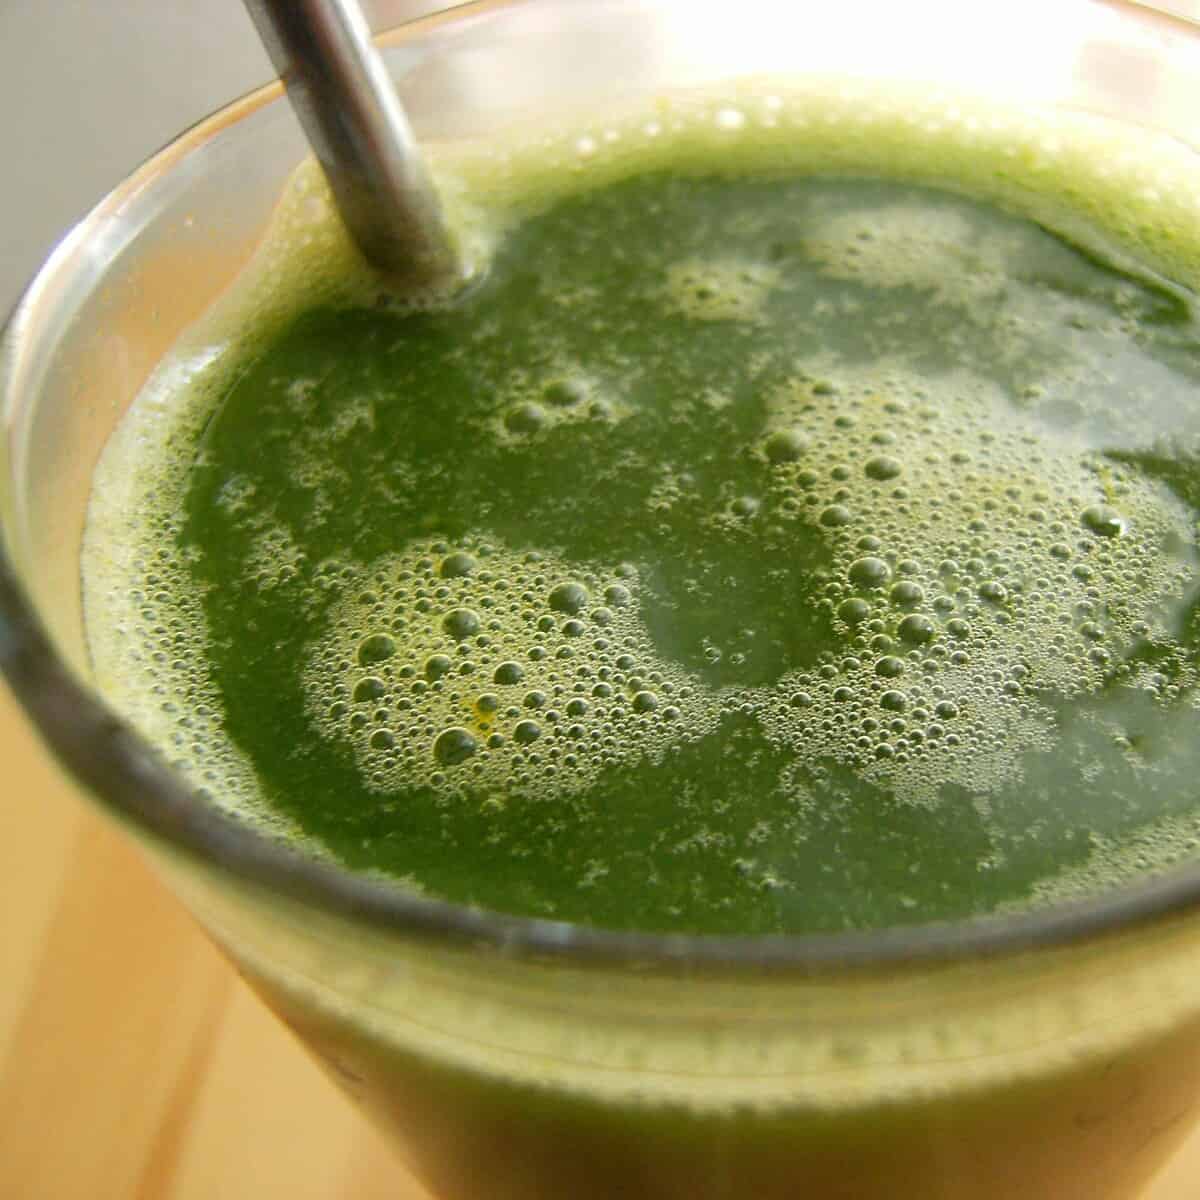  This vibrant green smoothie packs a powerful nutritional punch.